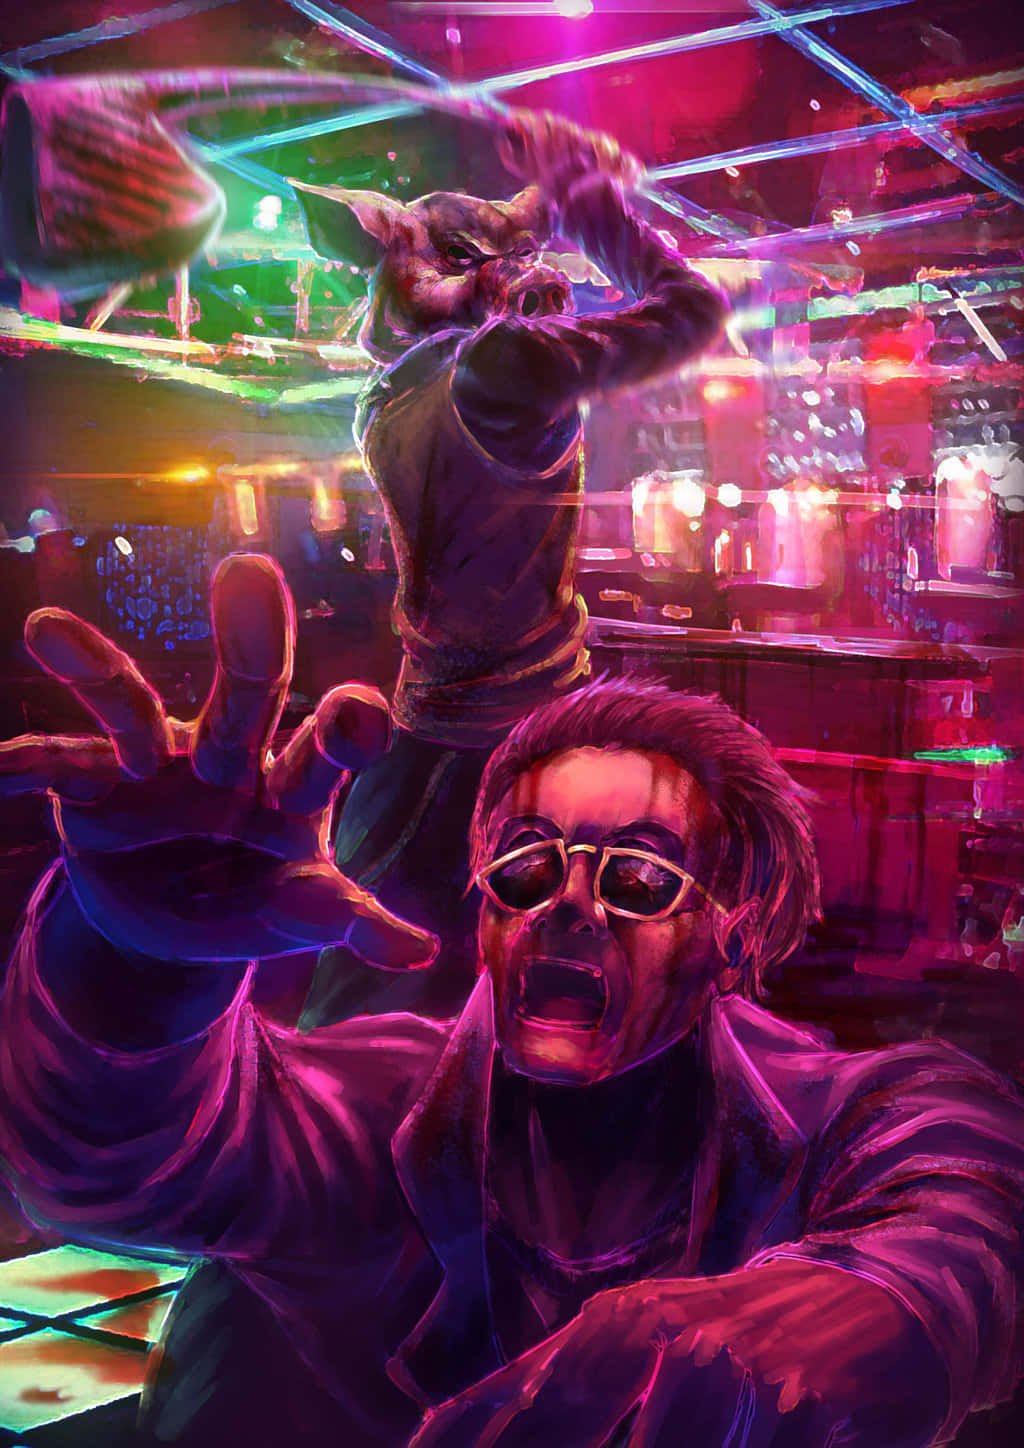 Retro-themed, action-packed Hotline Miami game scene.